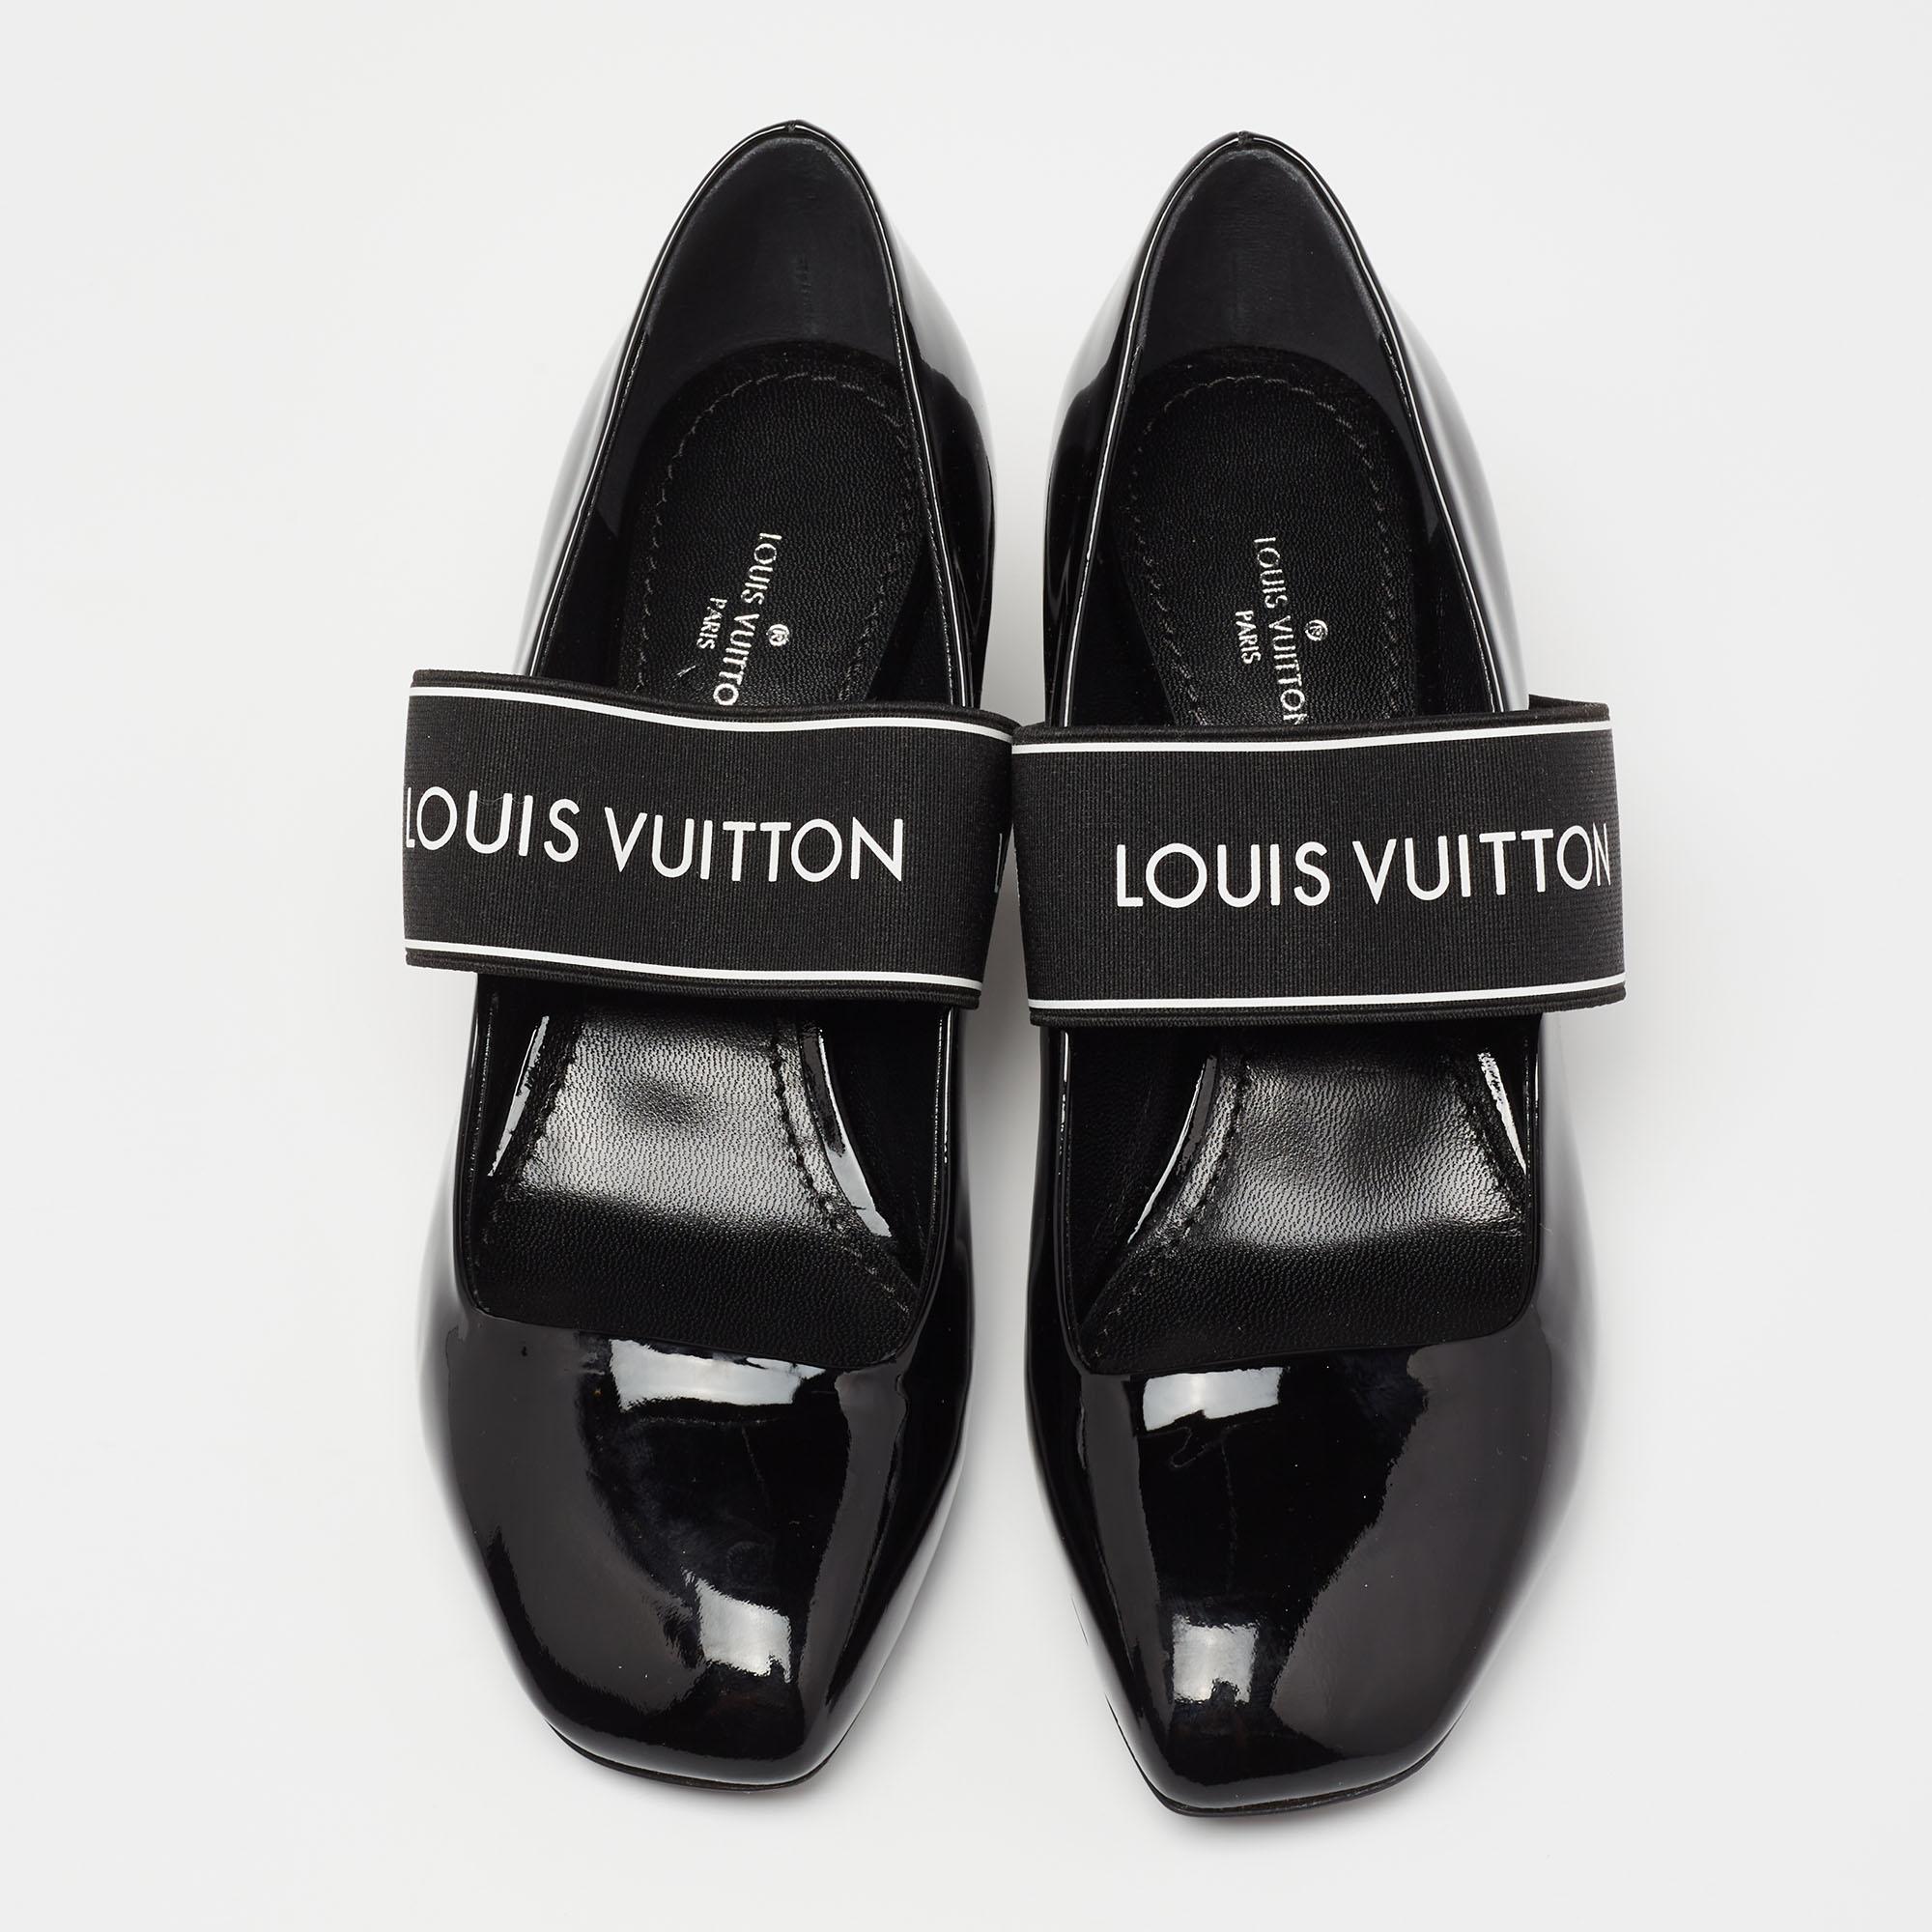 The Uncover pumps from Louis Vuitton are characterized by the branded strap across the vamps. This pair is presented in patent leather and added with square toes and block heels.

Includes: Original Box
